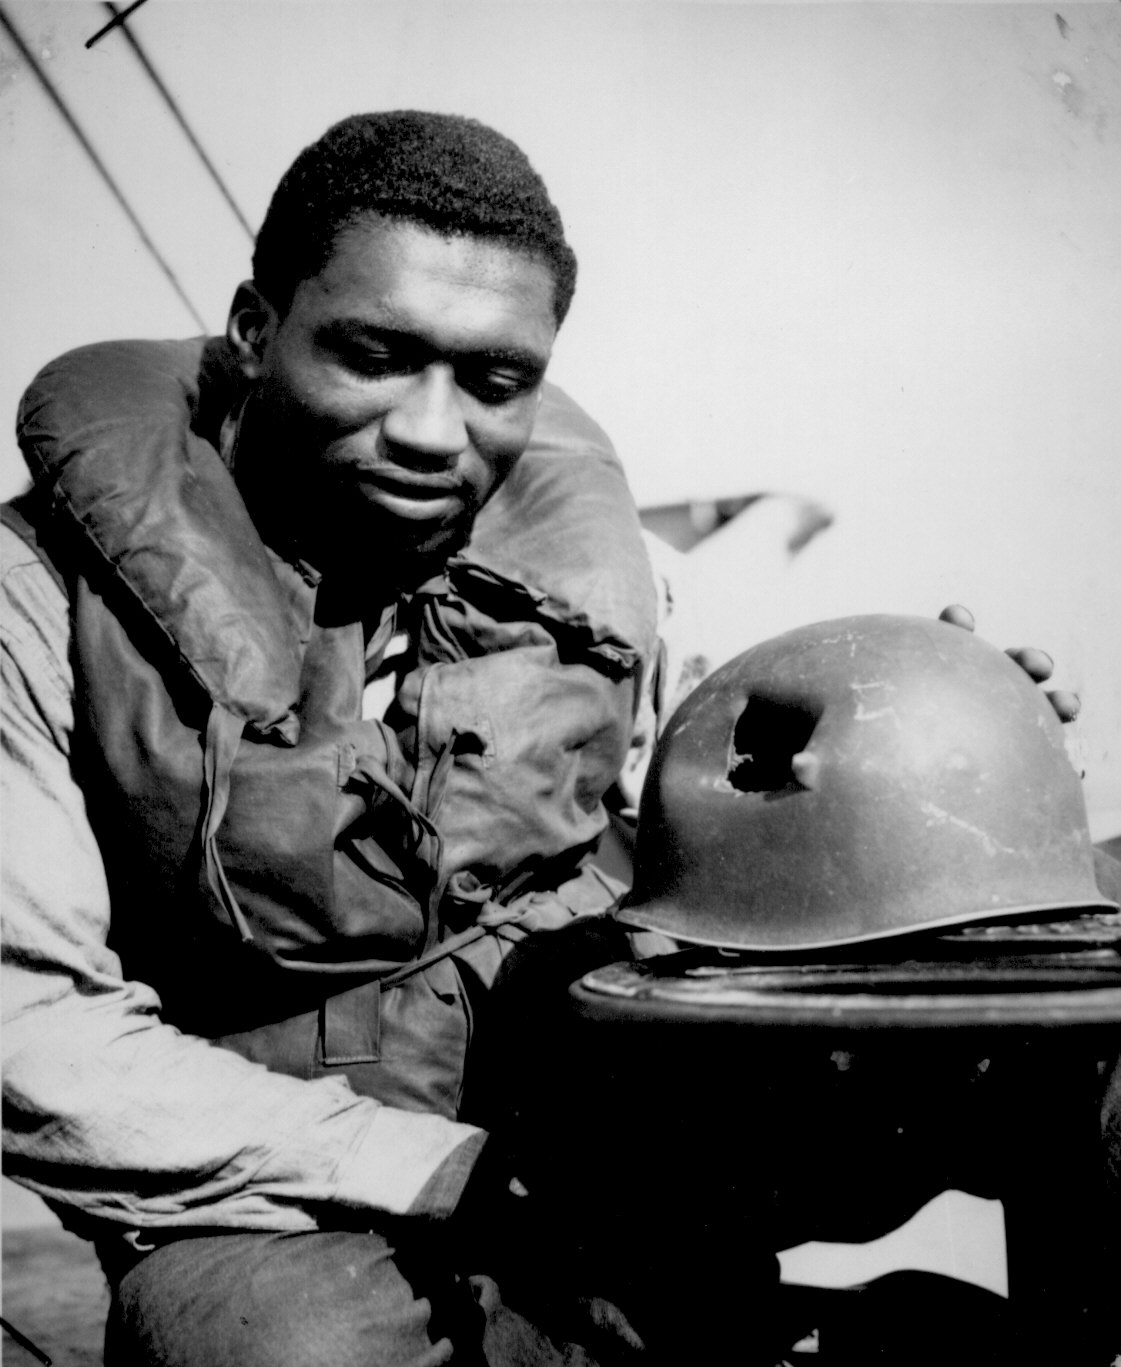 African-American US Coast Guardsman Fireman 1st Class Charles Tyner displaying his helmet, damaged by large shrapnel during the invasion of Southern France, circa late 1944